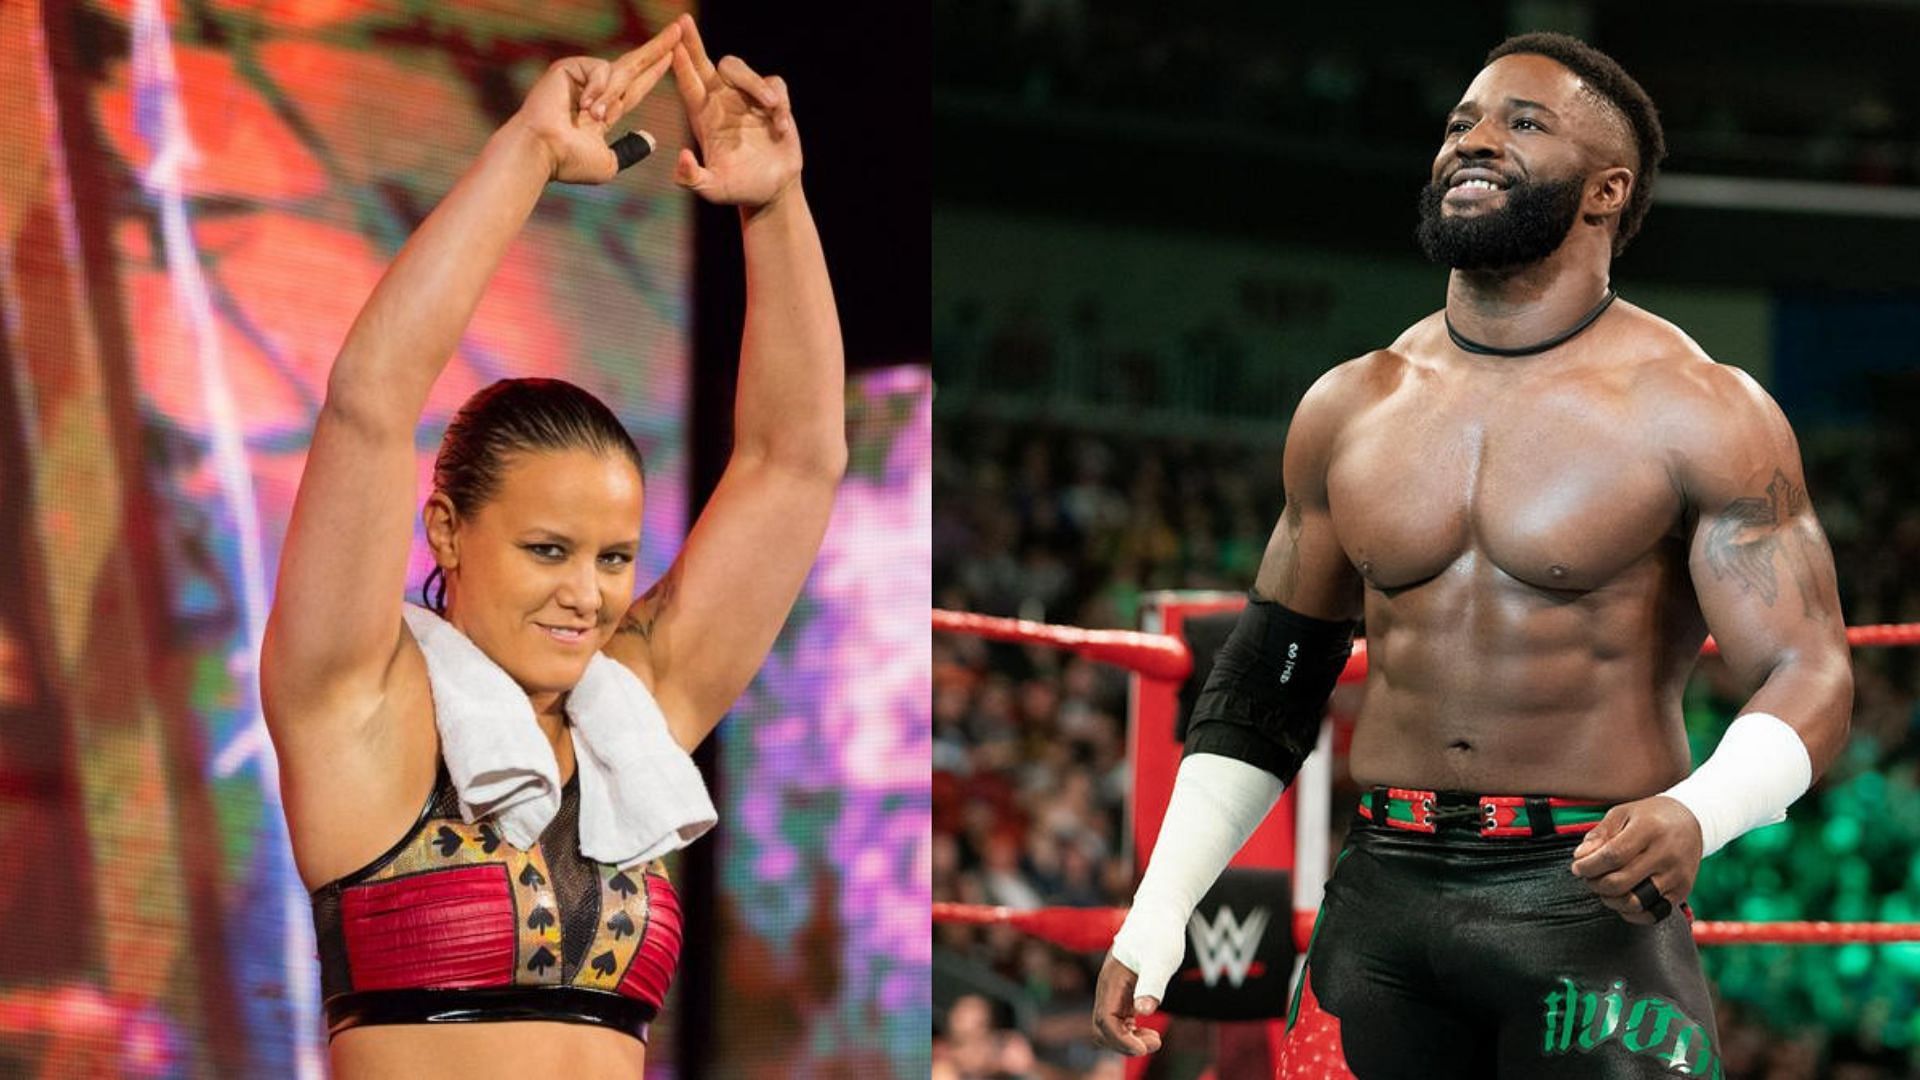 Both Shayna Baszler and Cedric Alexander would benefit from a spell in NXT